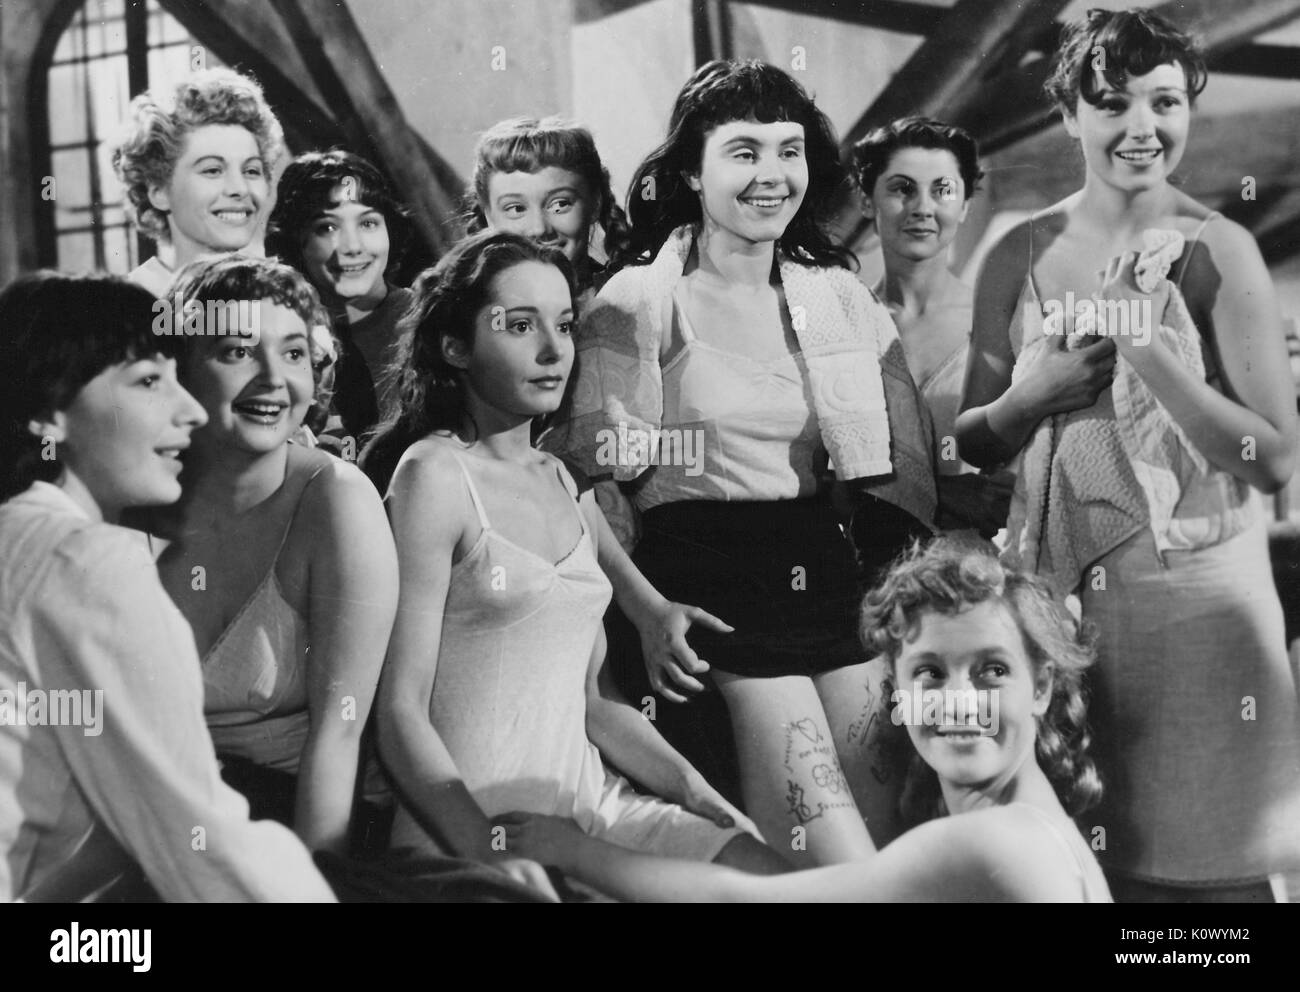 Au Royaume Des Cieux (In the Kingdom of Heaven), movie still depicting girls in pajamas standing in a group and looking off screen, one girl with an apprehensive facial expression, from the film noir movie by director Julien Duvivier, which tells the story of girls in a female reformatory who are persecuted by a sadistic head warden, and who attempt to escape with the help of the heroines lover, played by Serge Reggiani, 1949. Stock Photo